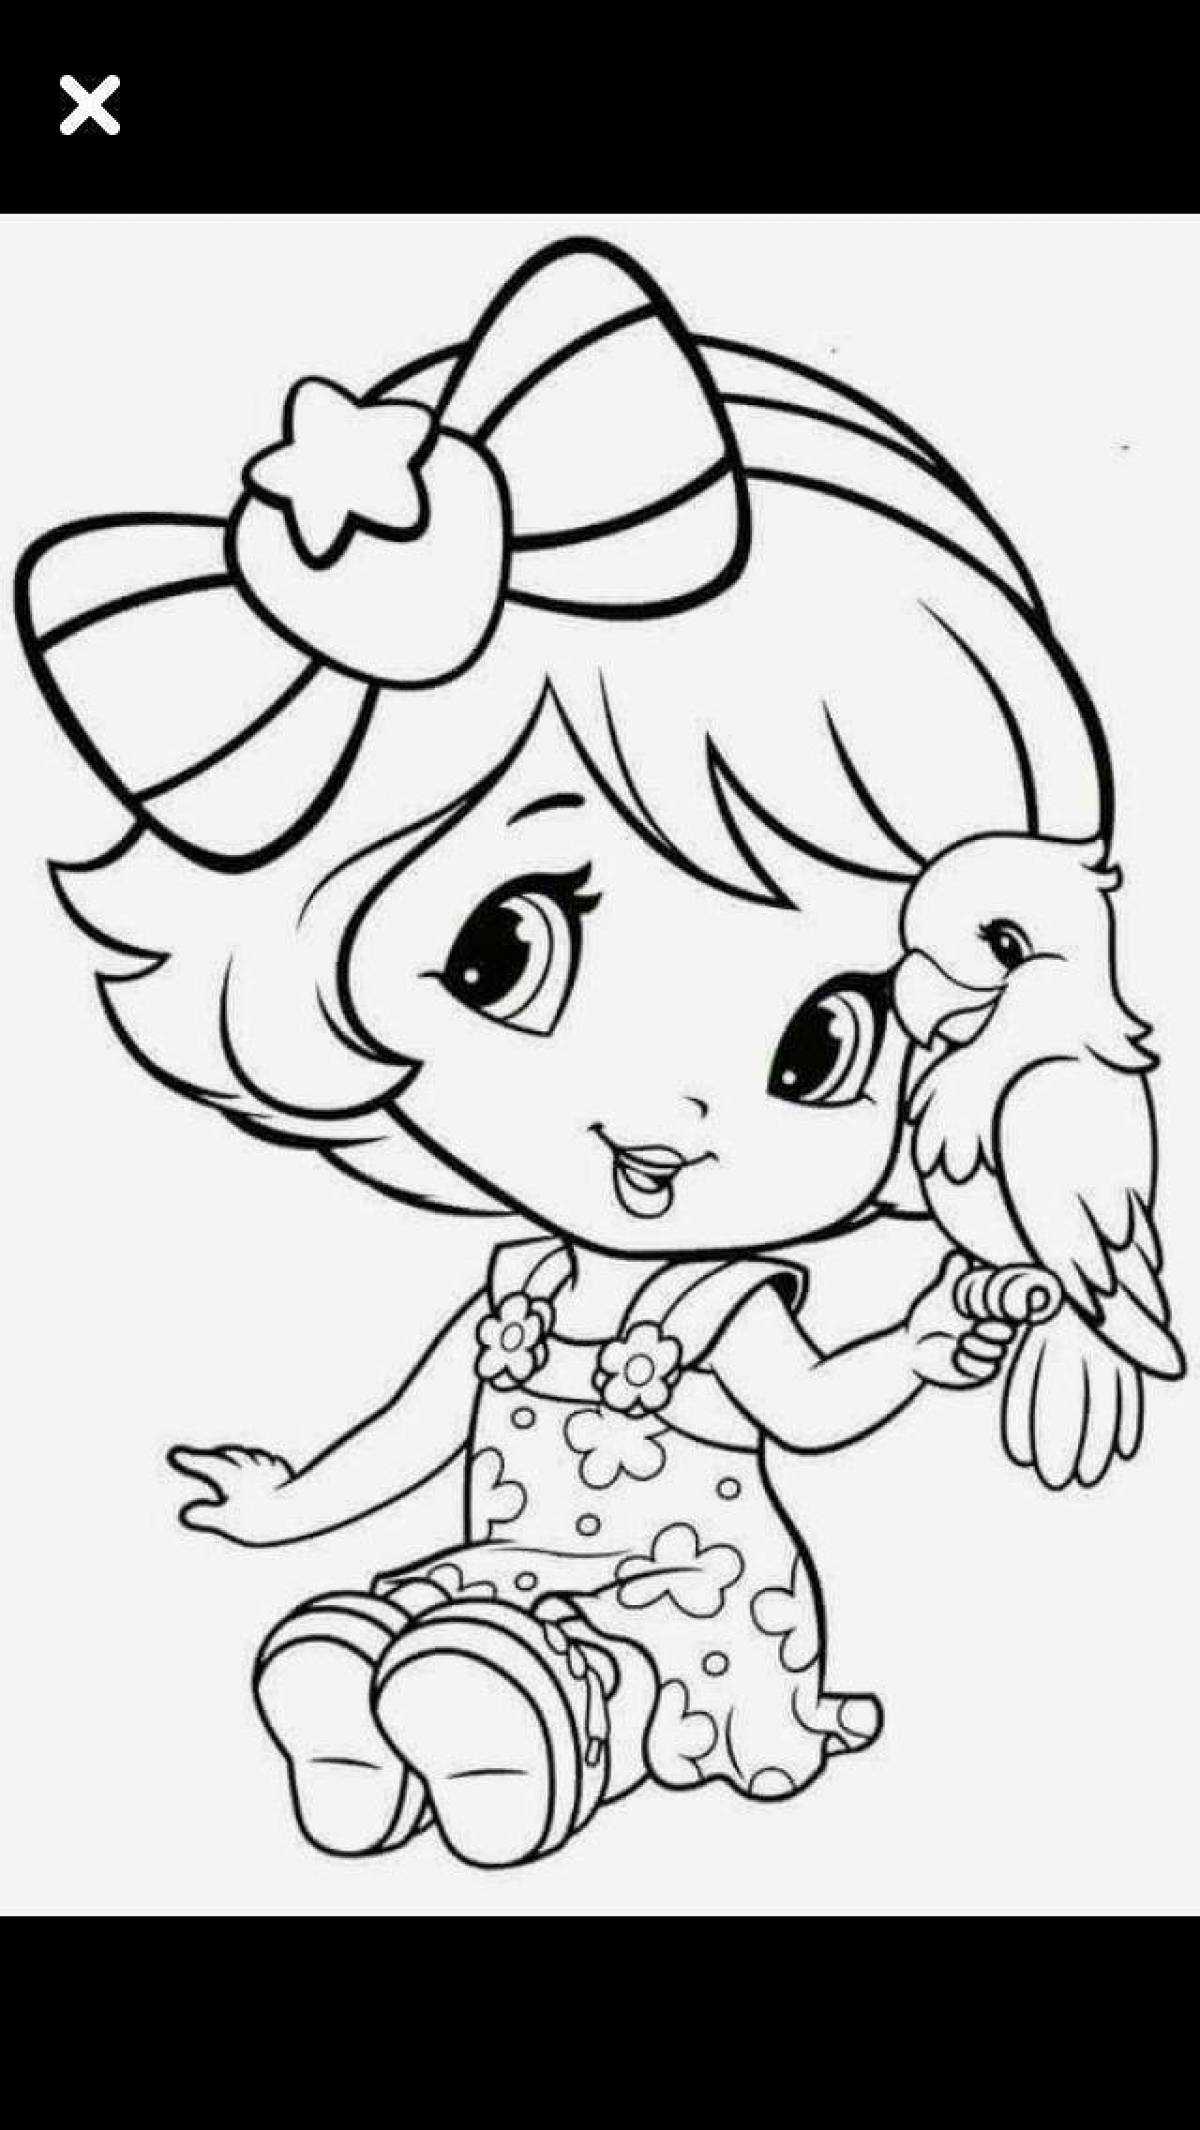 Amazing coloring pages for little girls